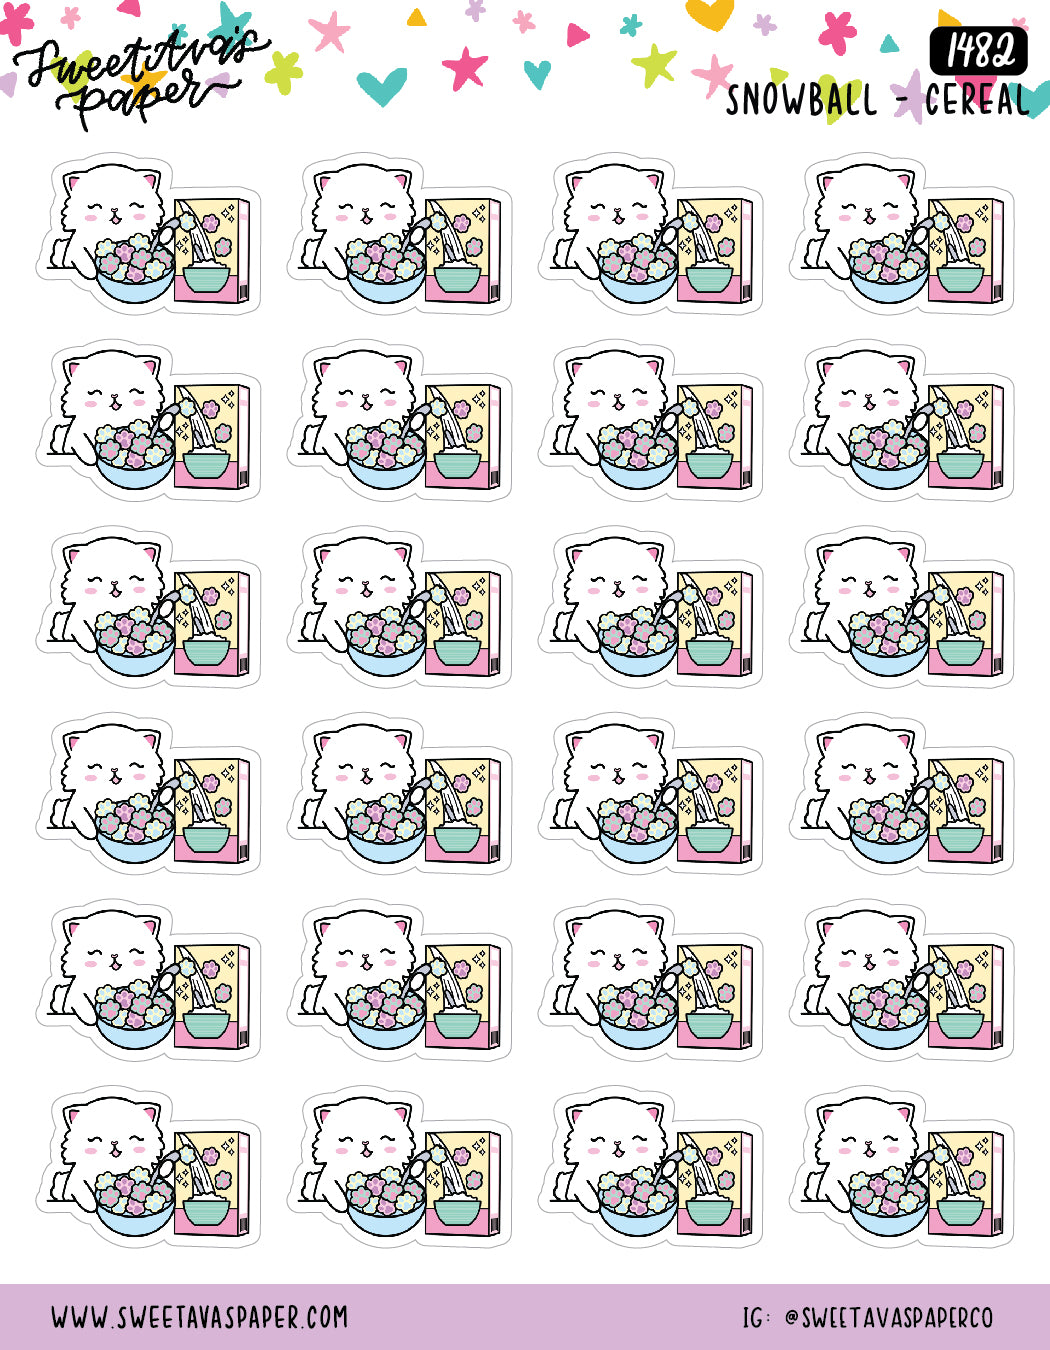 Eating Cereal Planner Stickers - Snowball The Cat [1482]